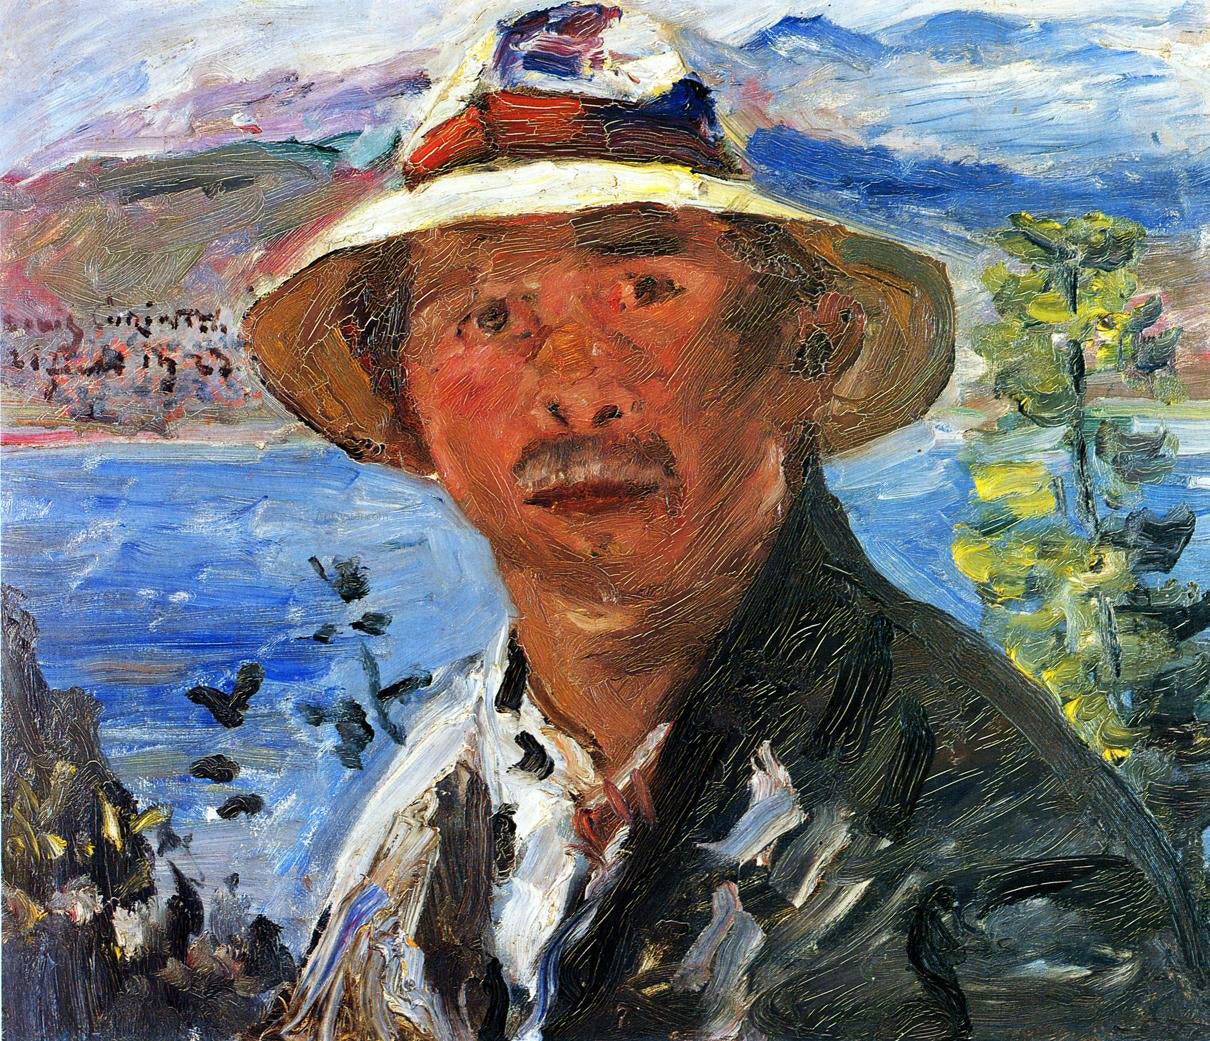  Lovis Corinth Self Portrait with Straw Hat - Hand Painted Oil Painting